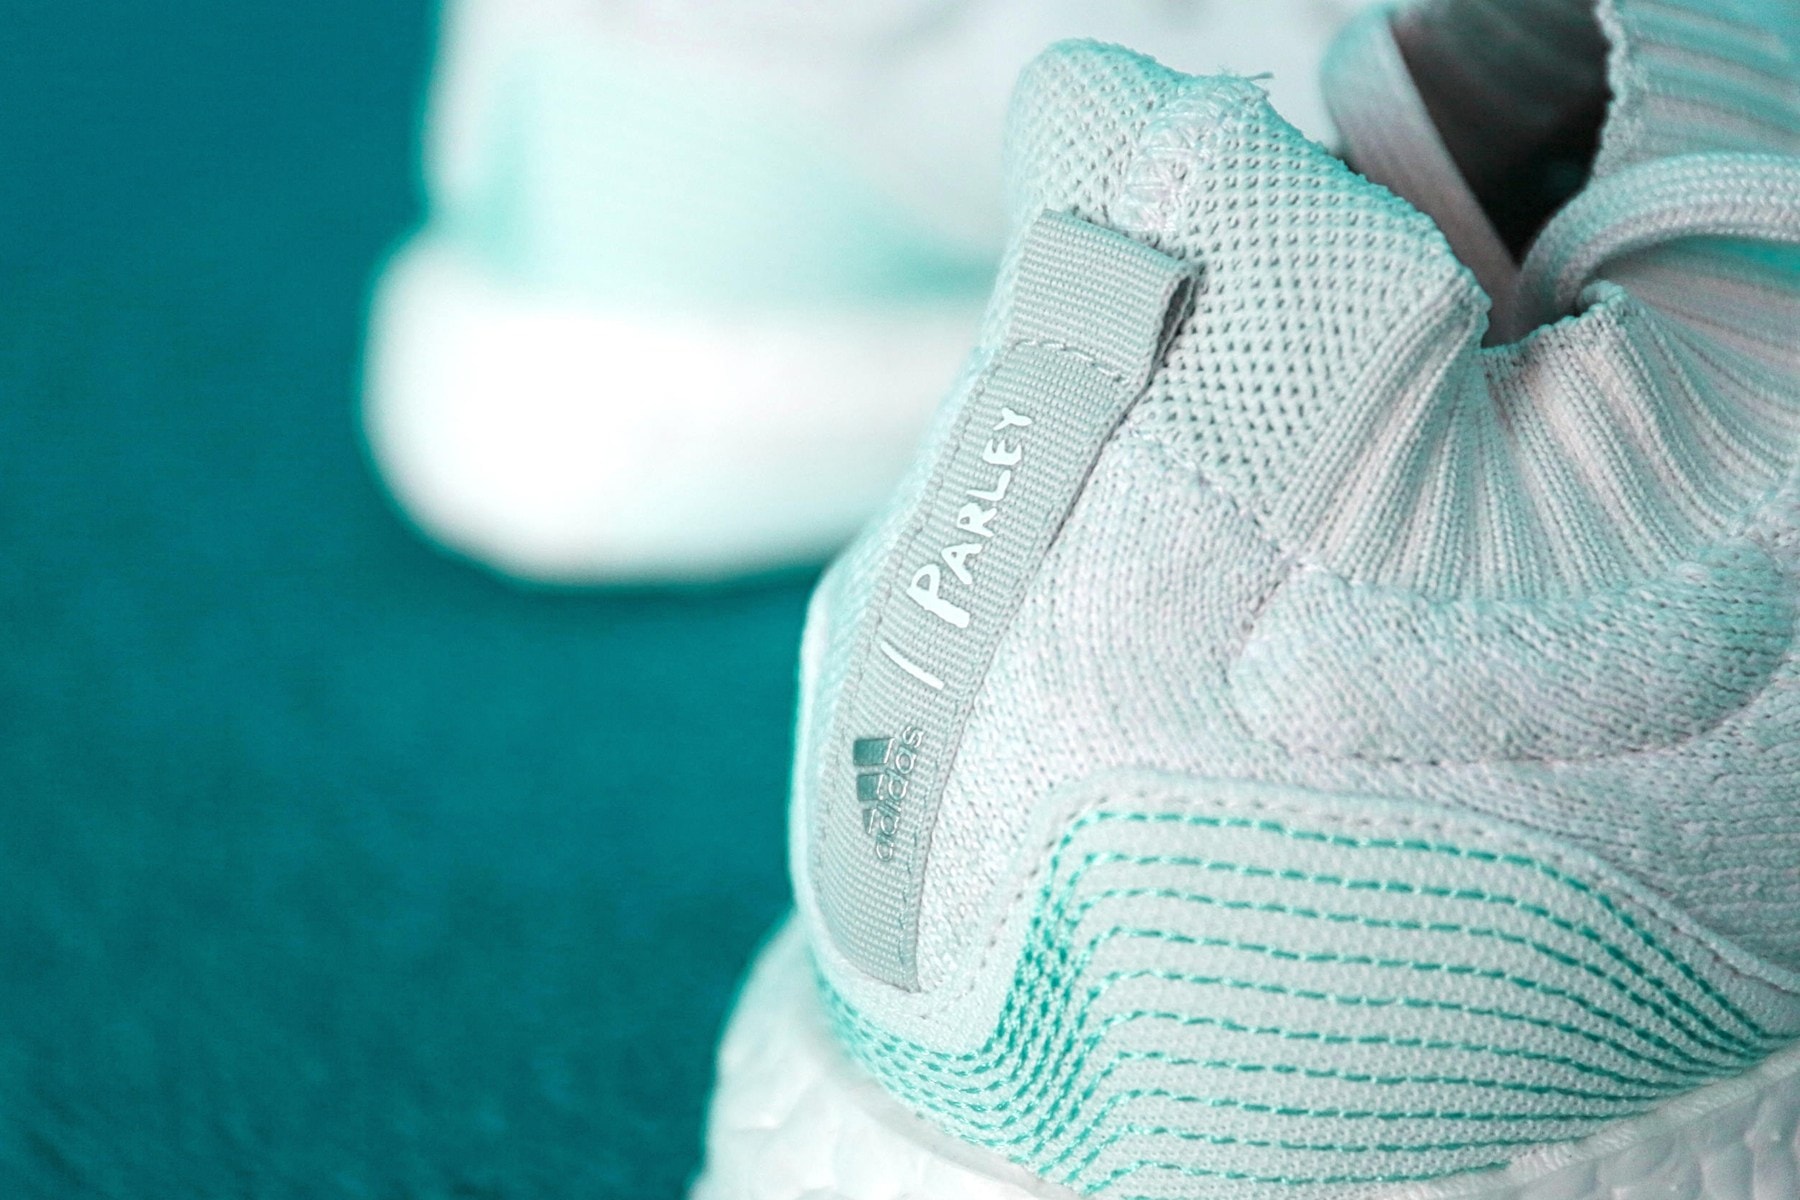 adidas x Parley Ocean UltraBOOST Uncaged A Closer Look Three Stripes Sneakers White BOOST midsole Teal World Ocean's Day